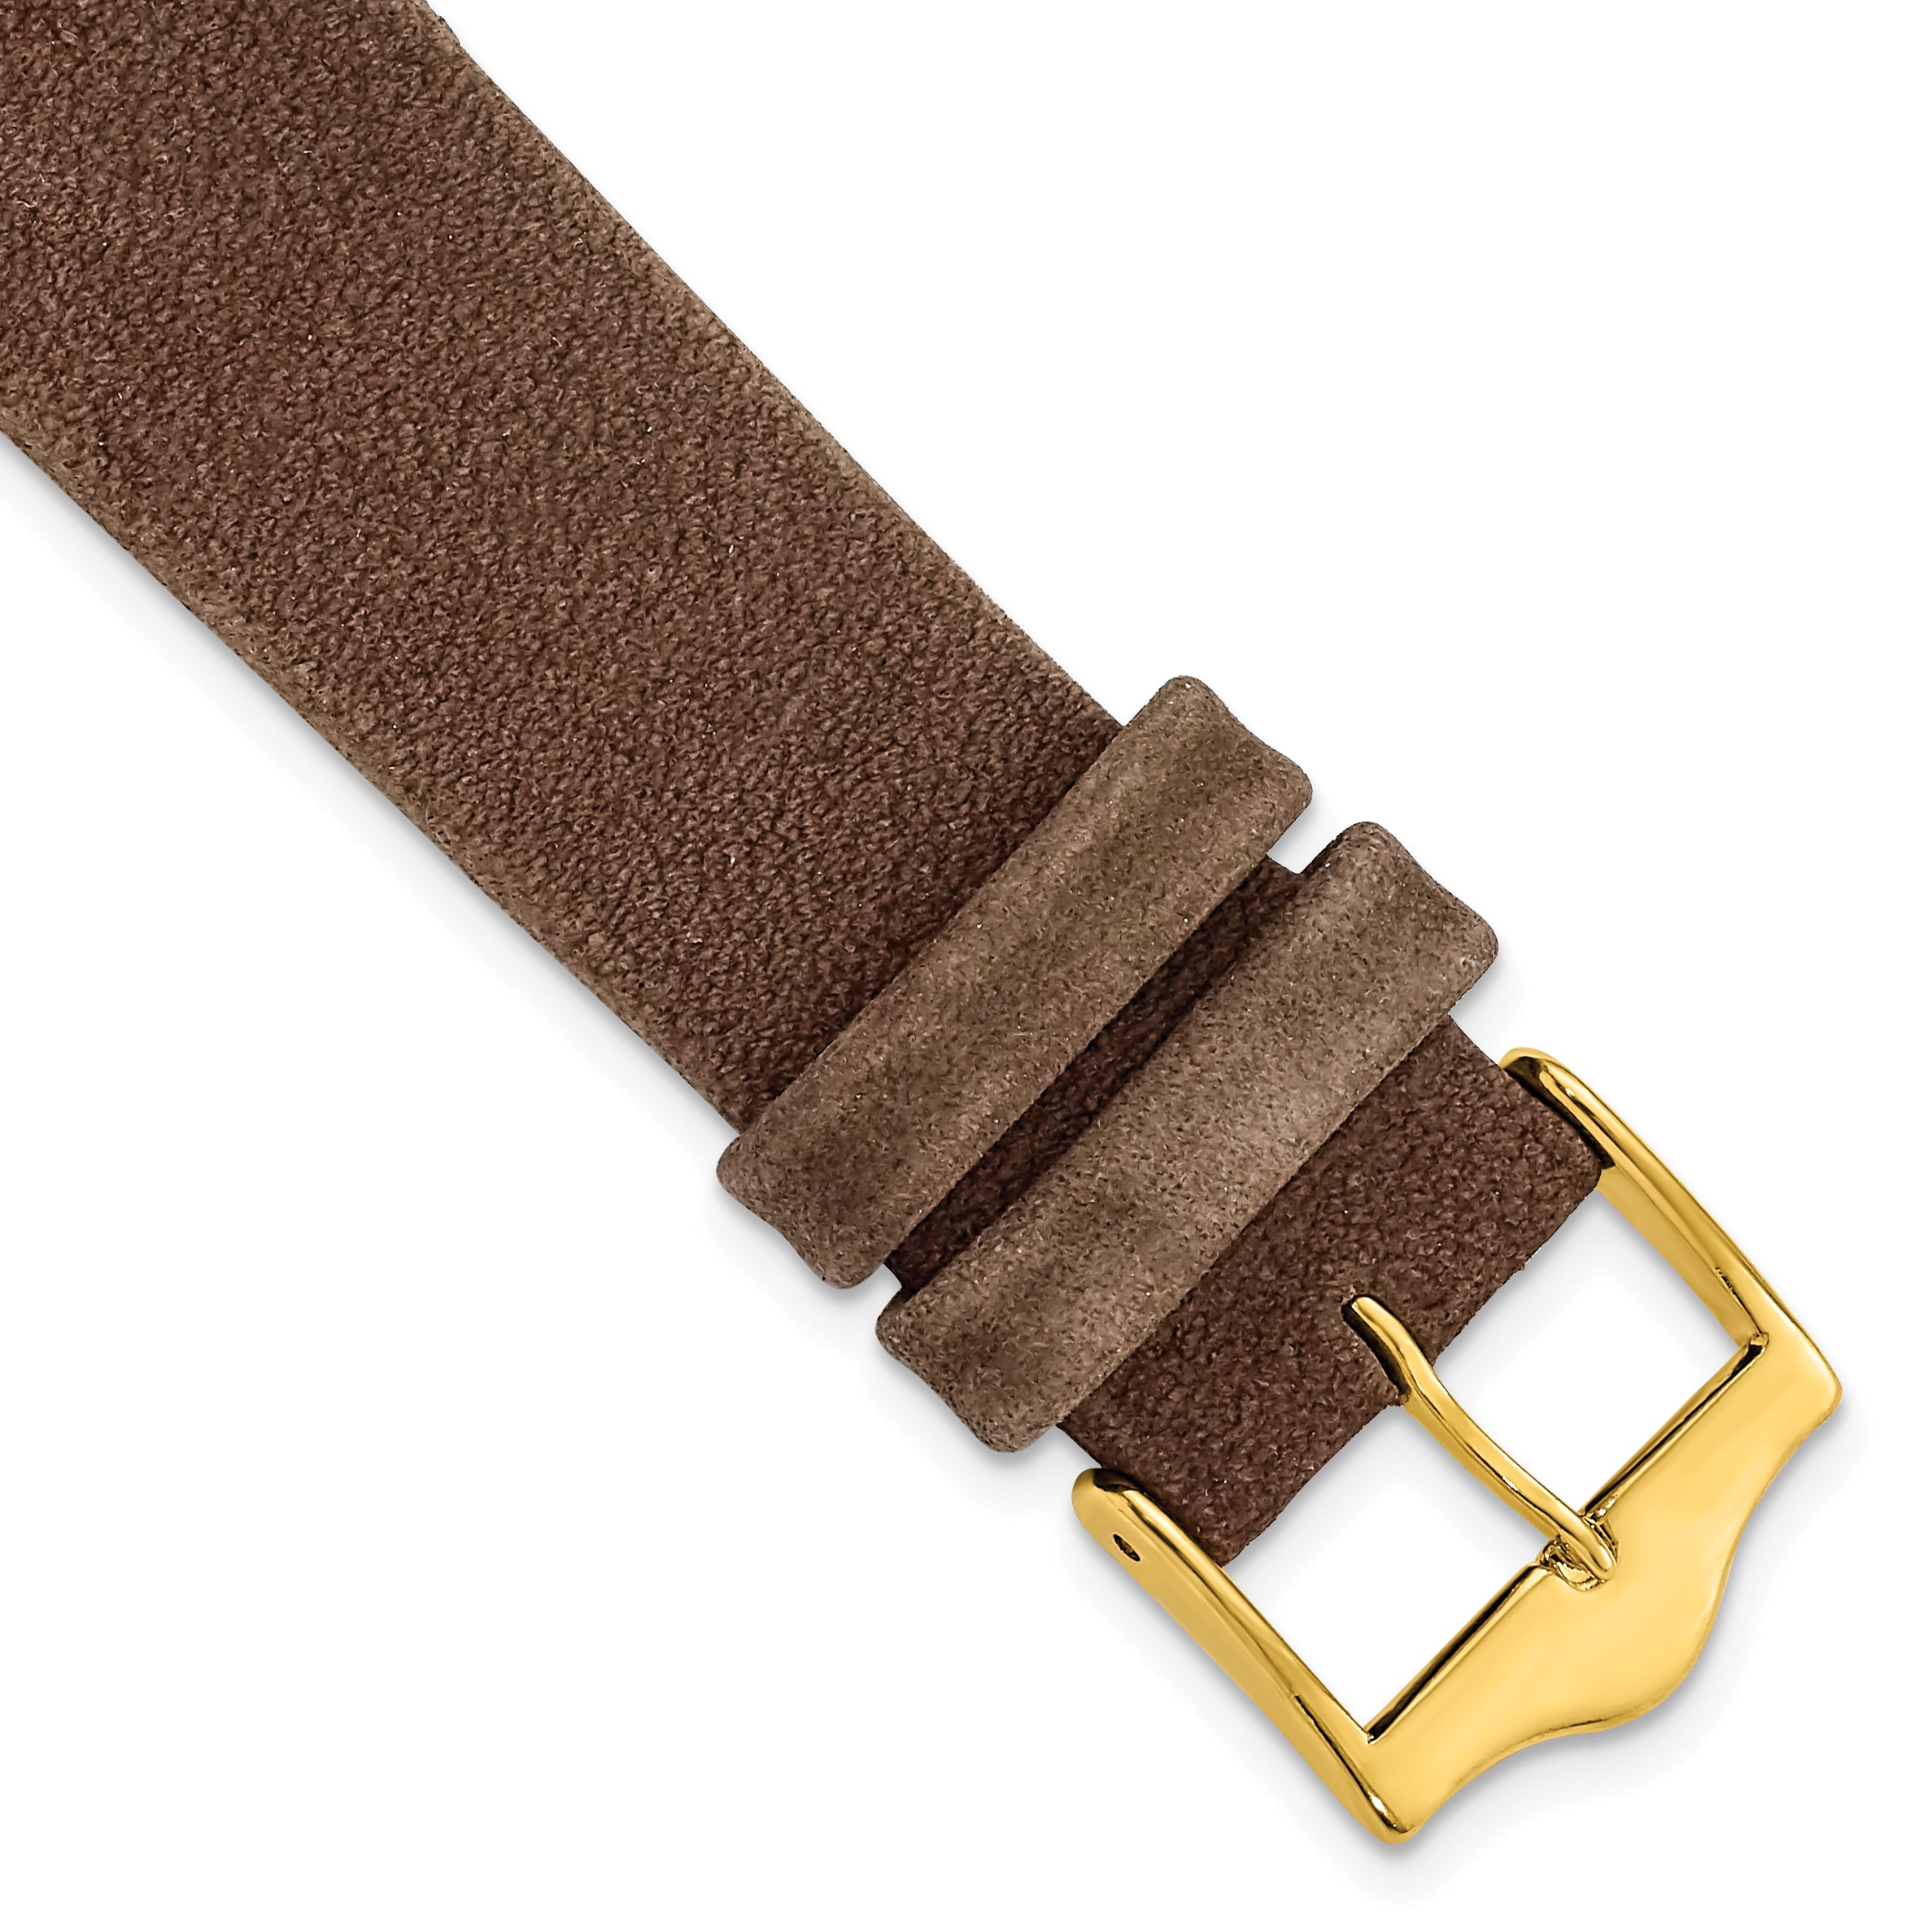 DeBeer 18mm Dark Brown Suede Flat Leather with Gold-tone Buckle 7.75 inch Watch Band